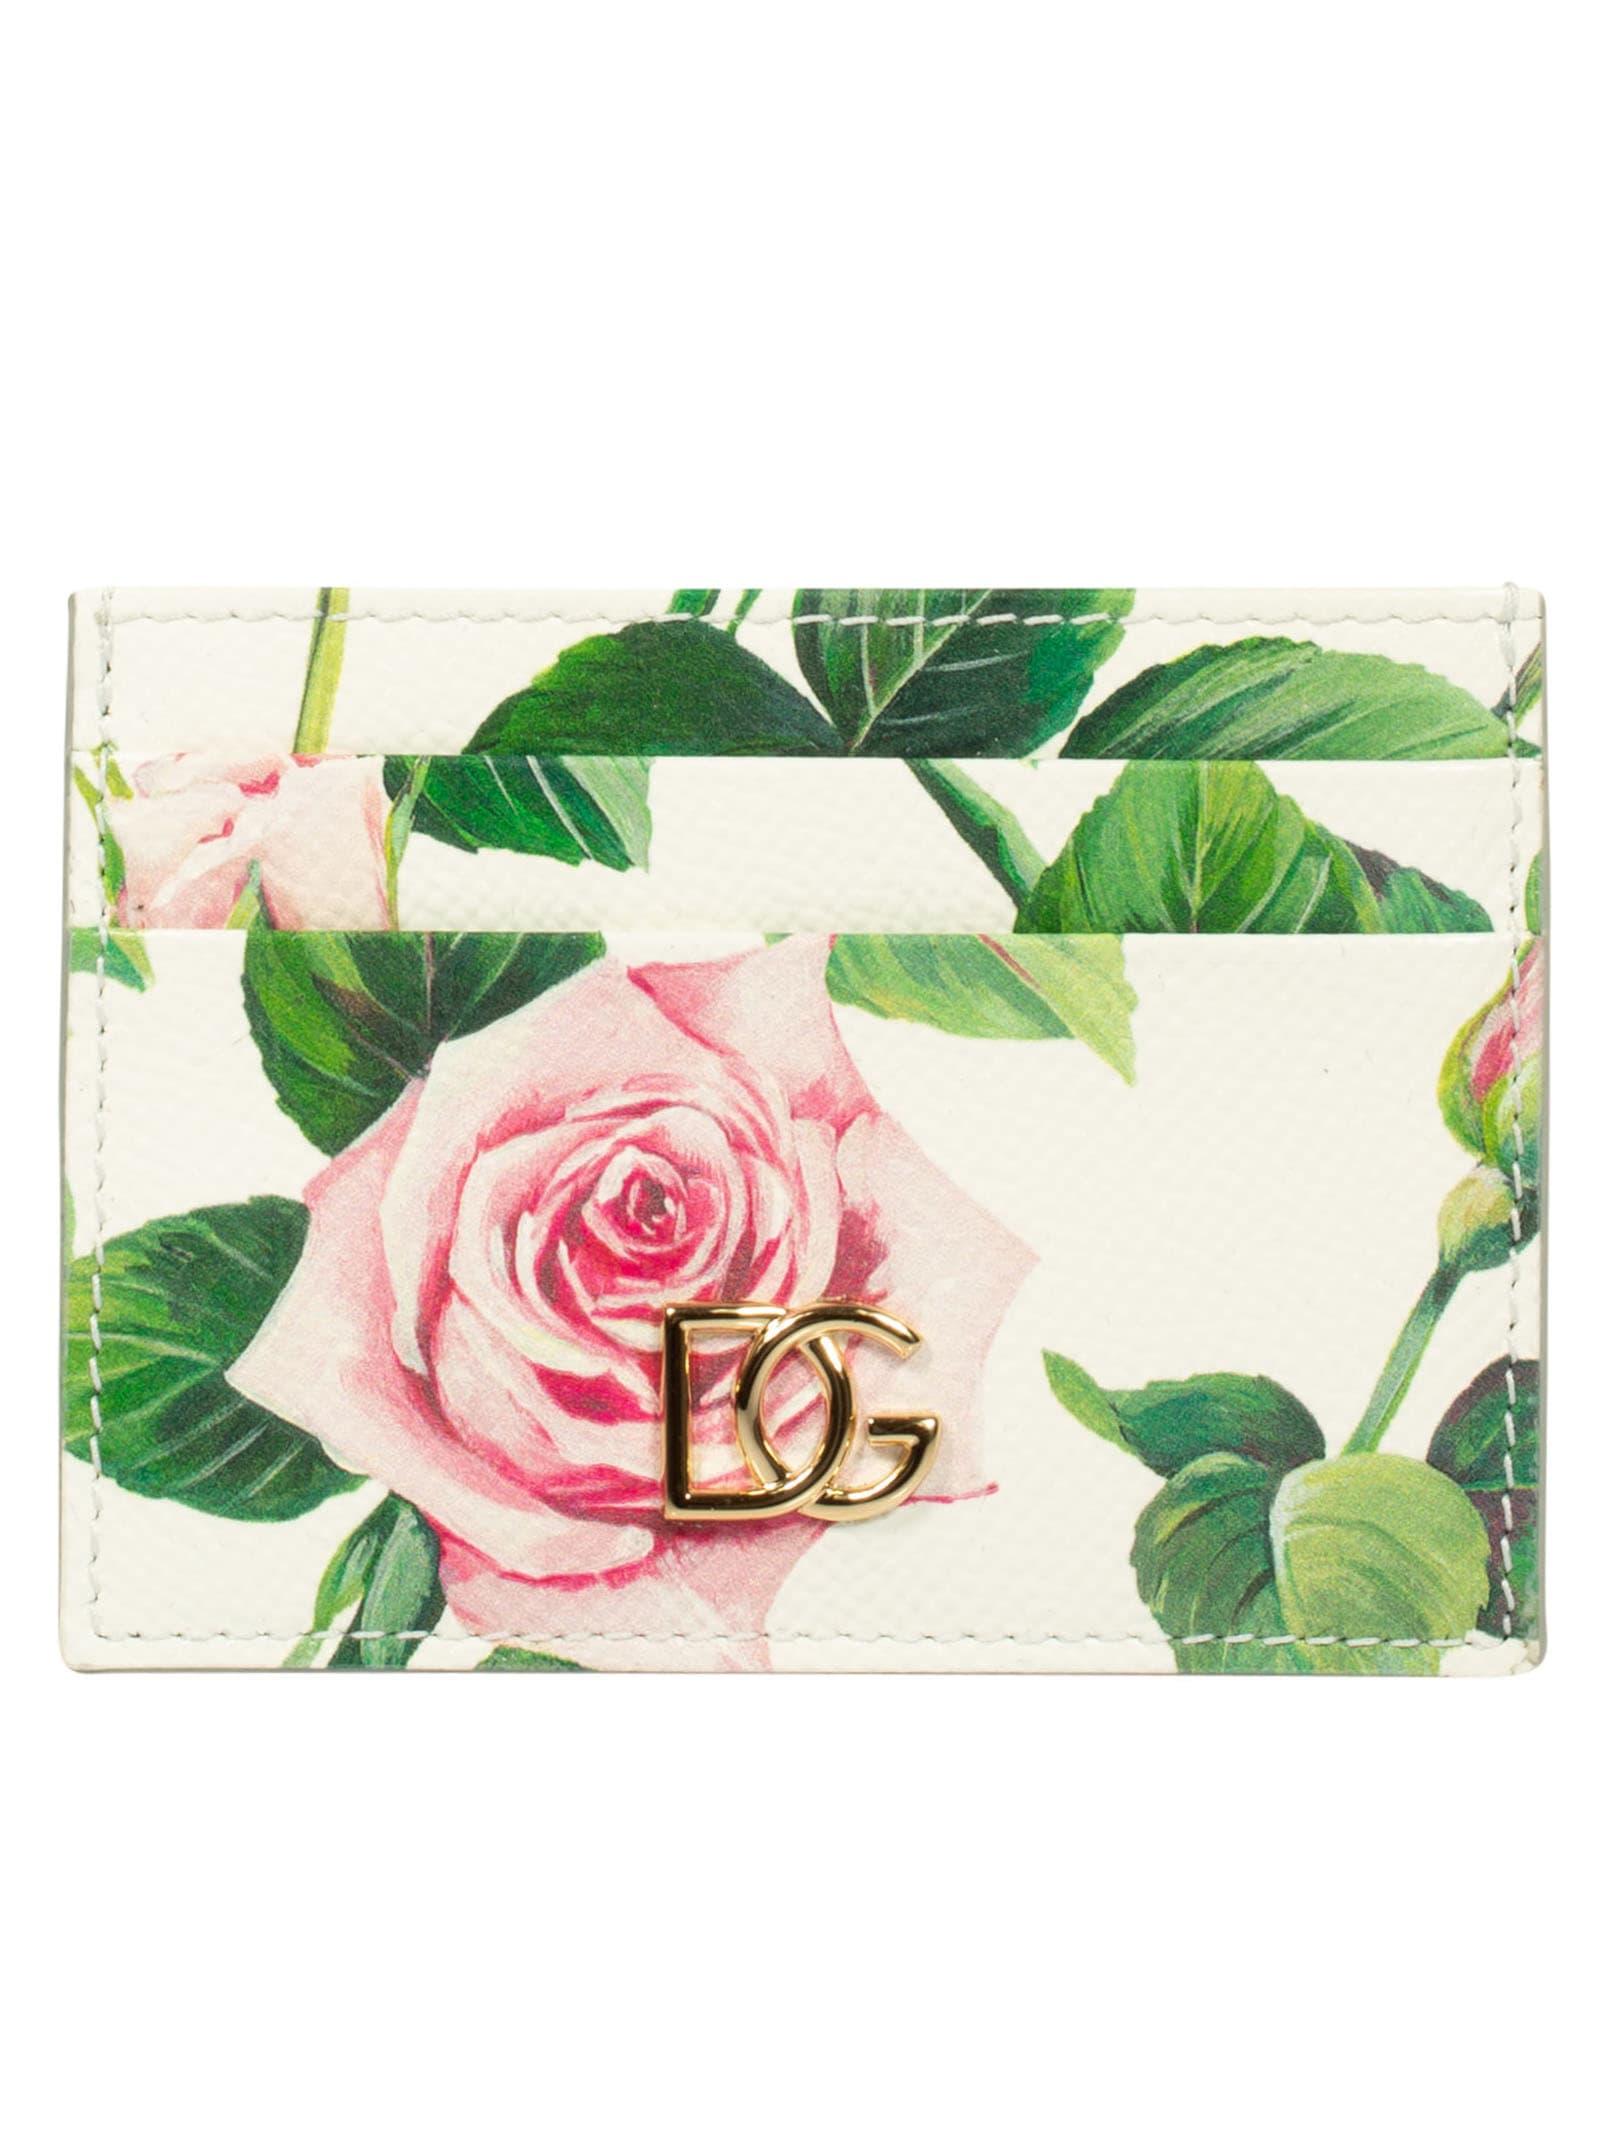 dolce and gabbana wallet sale